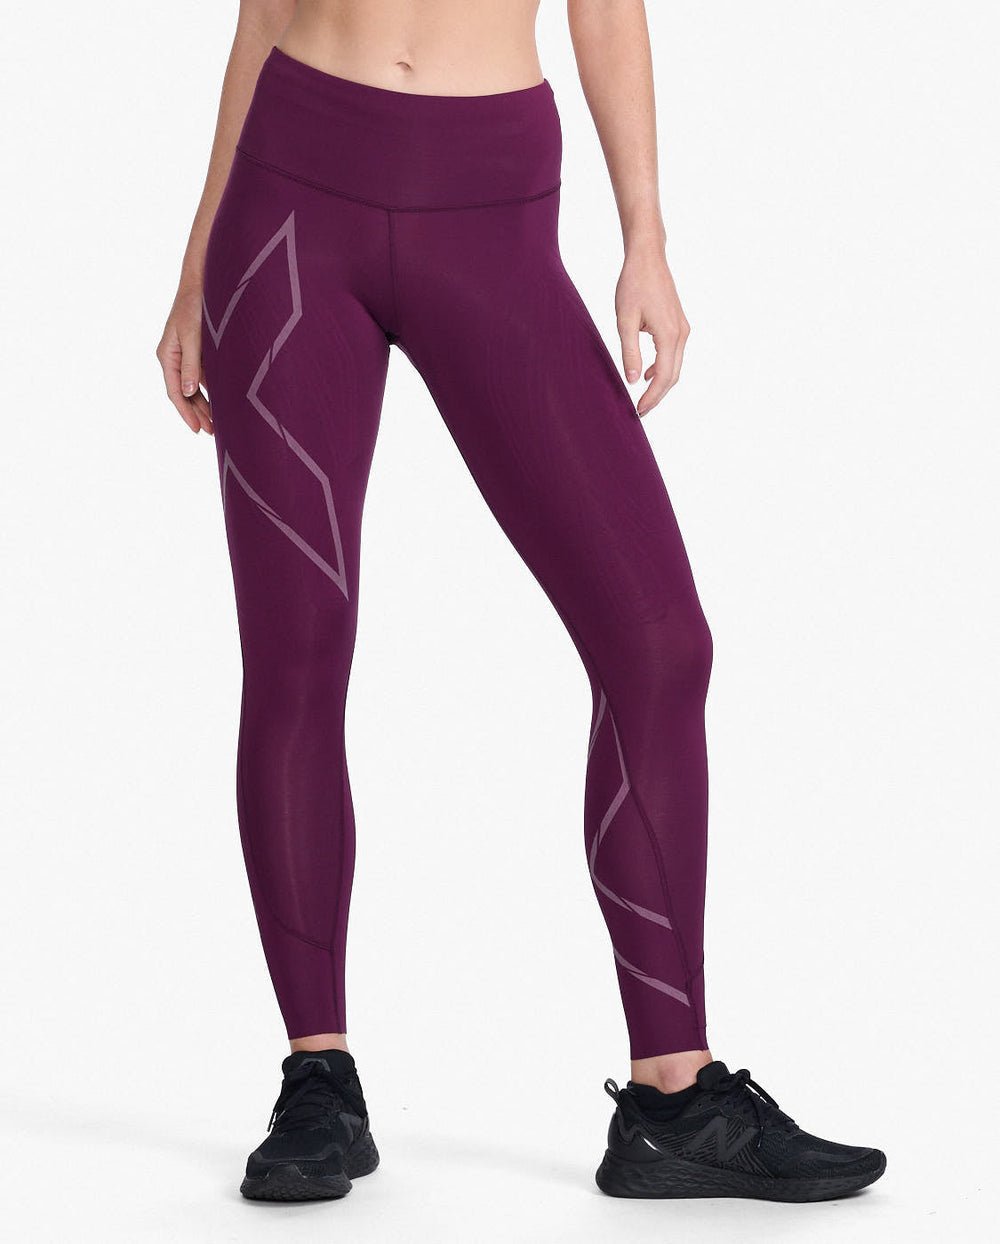 2XU South Africa - Women's Light Speed Mid-Rise Compression Tights - Beet/Beet Reflective